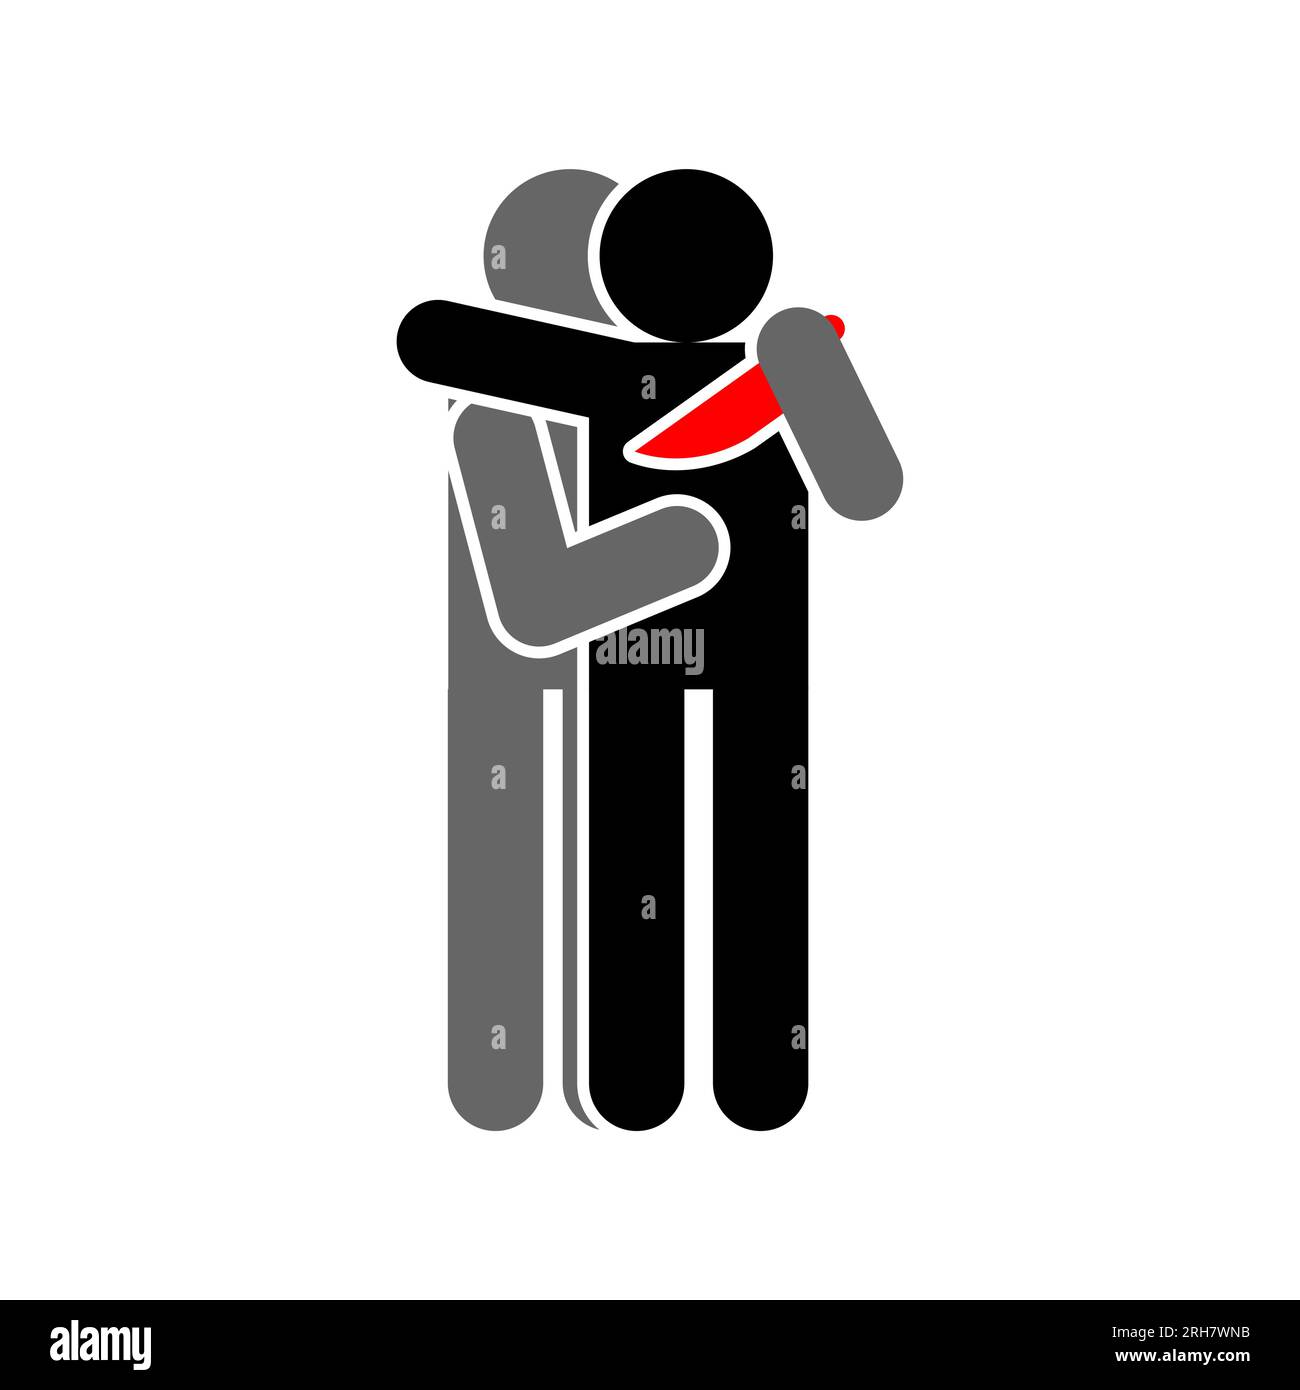 Traitor sign icon. Betrayal symbol. Concept of betrayal is a knife in the back. Stock Vector